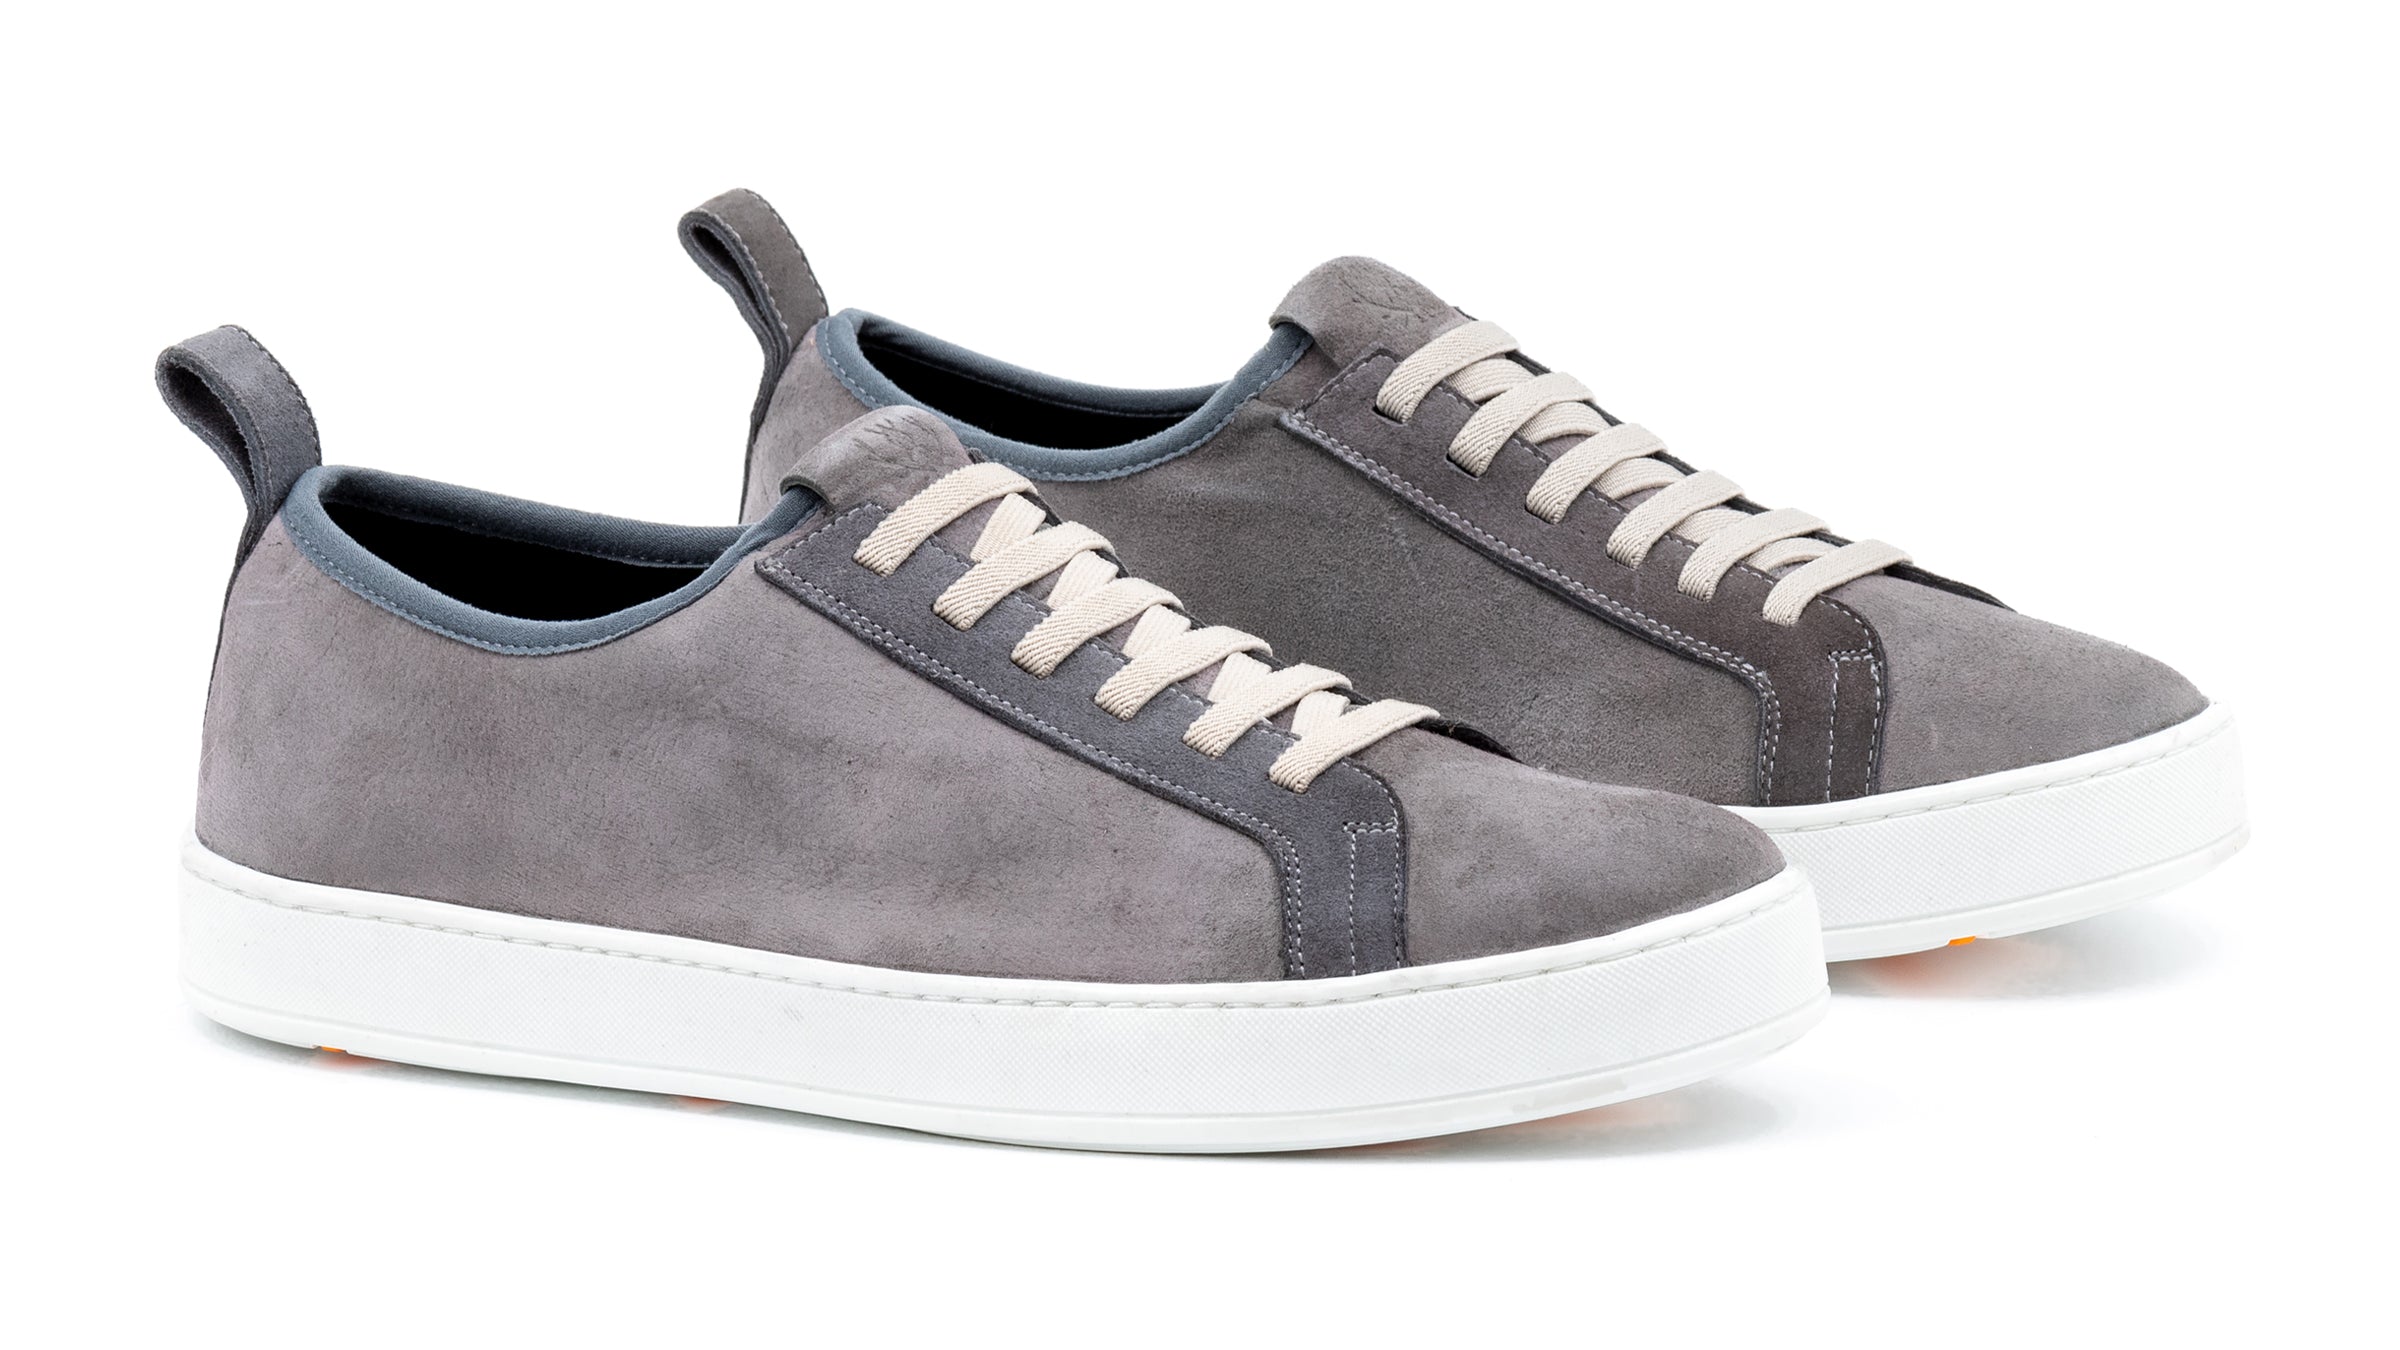 MD Signature Sheep Skin Suede Sneakers - Slate